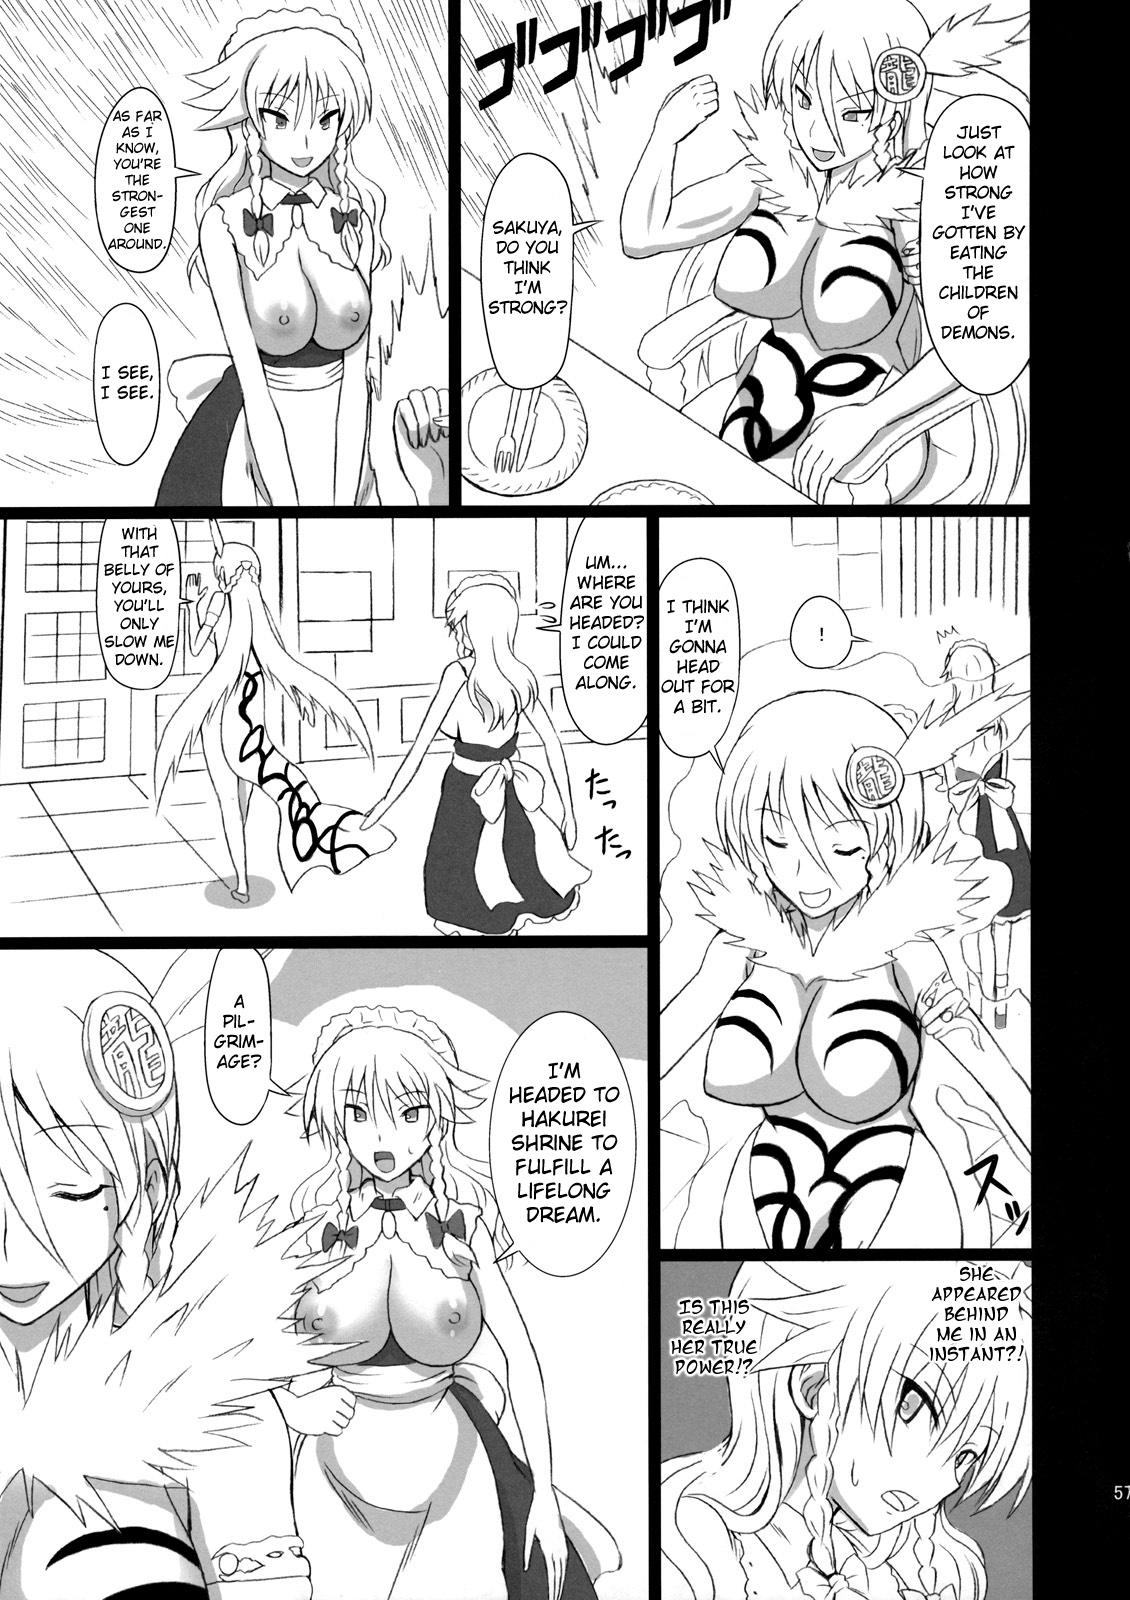 Thief Extend Party 3 - Touhou project Alternative - Page 57